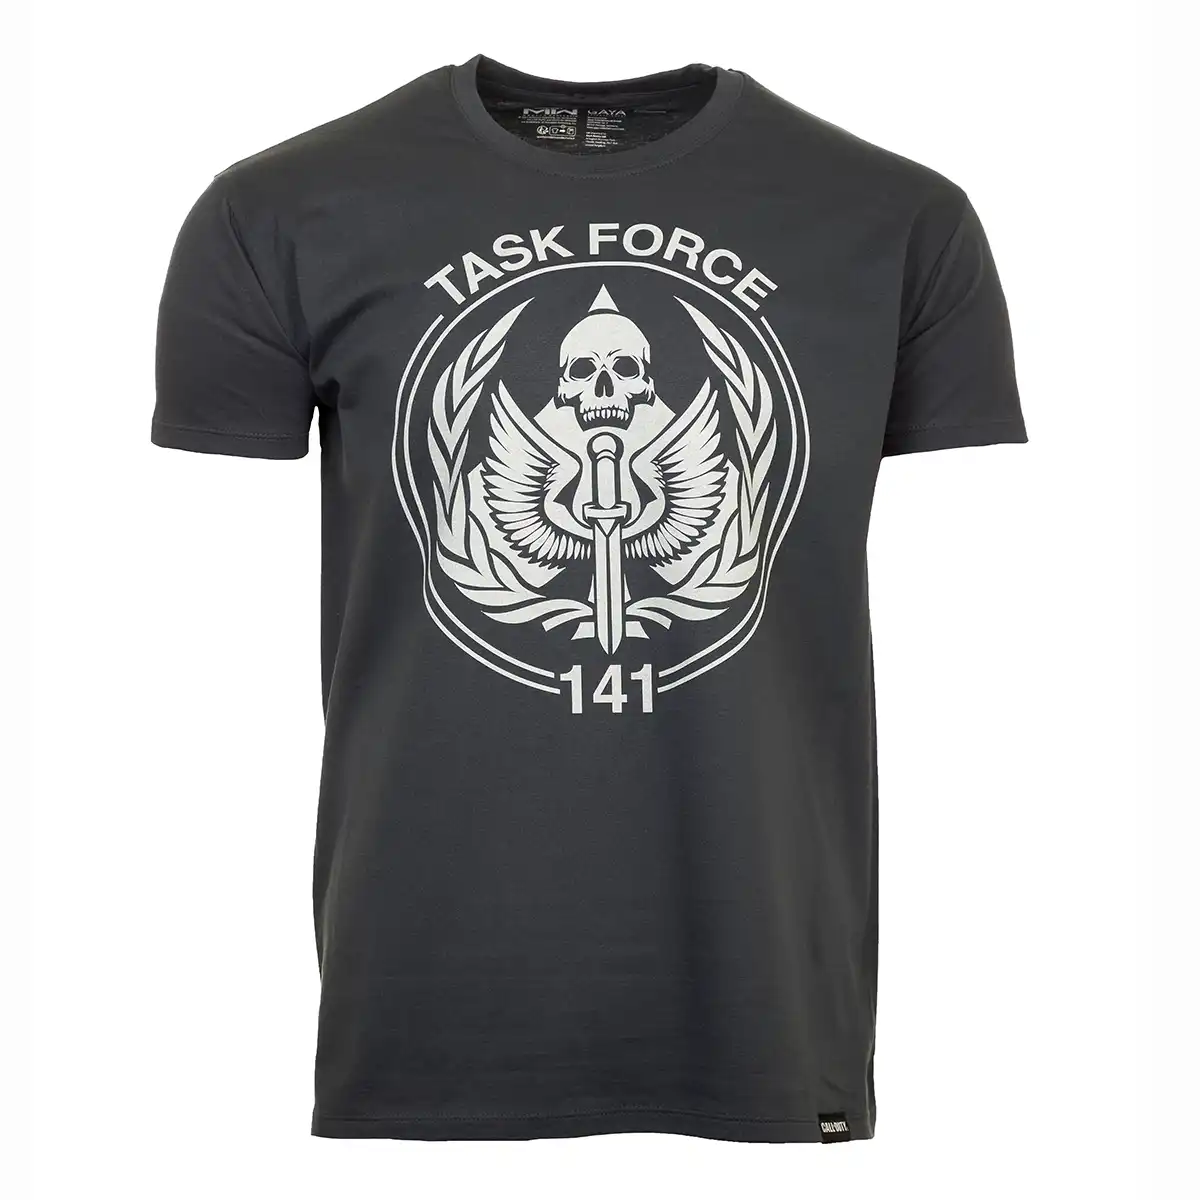 Call of Duty T-Shirt "Task Force Icon" Mousegrey XL